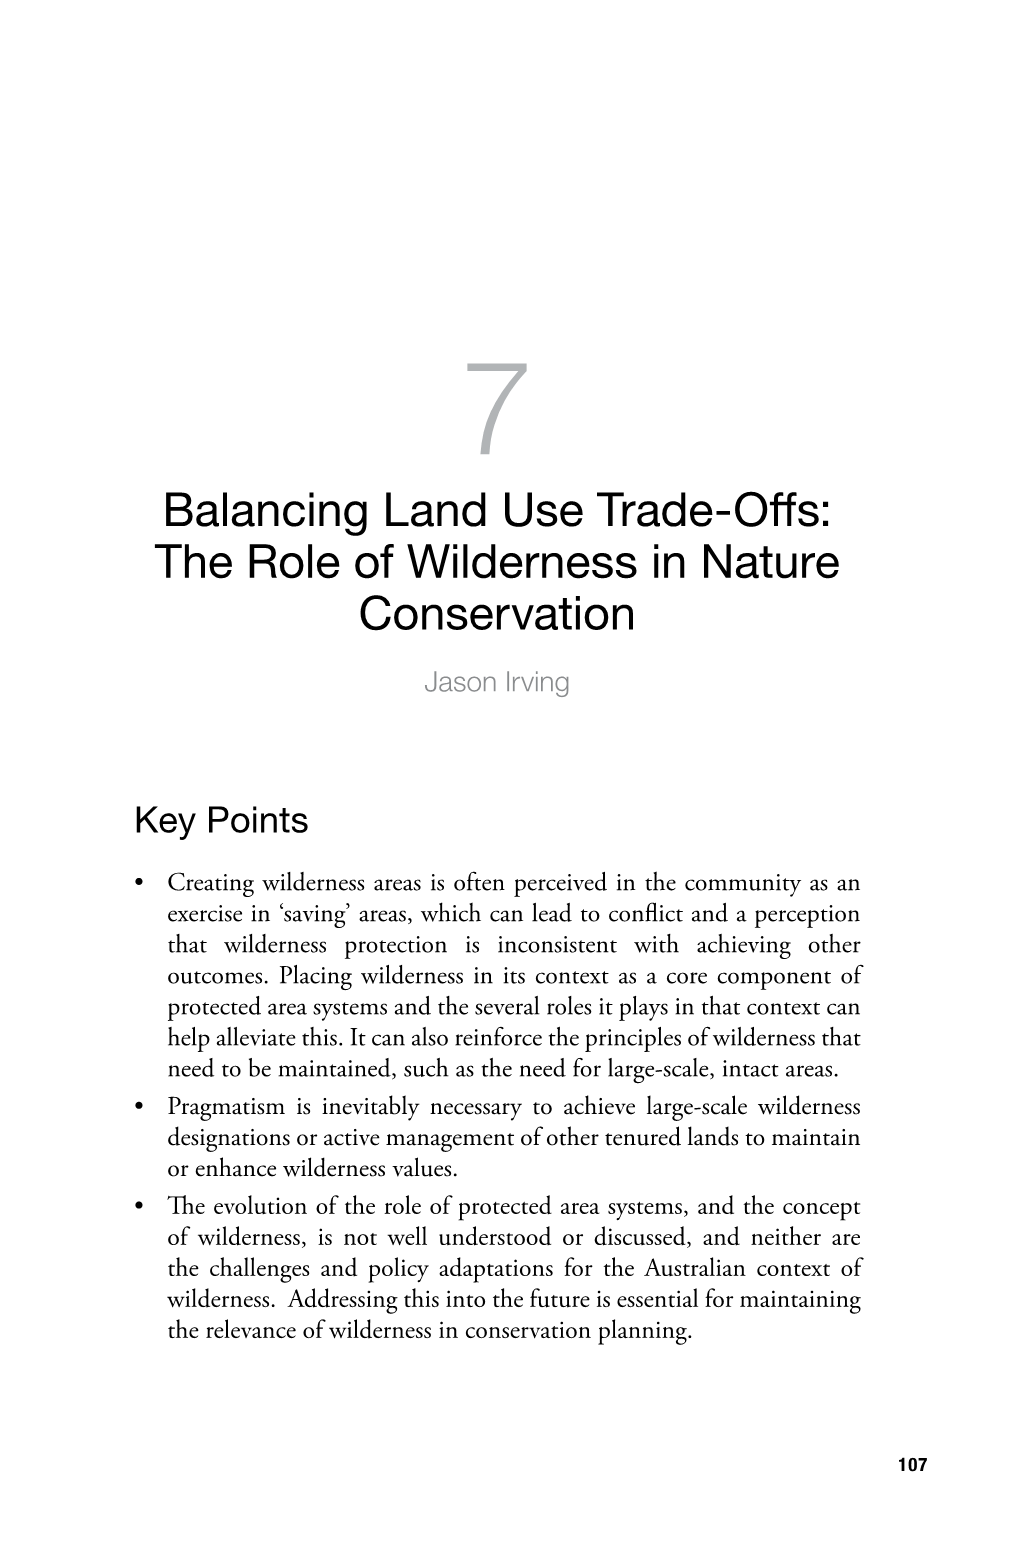 Balancing Land Use Trade-Offs: the Role of Wilderness in Nature Conservation Jason Irving